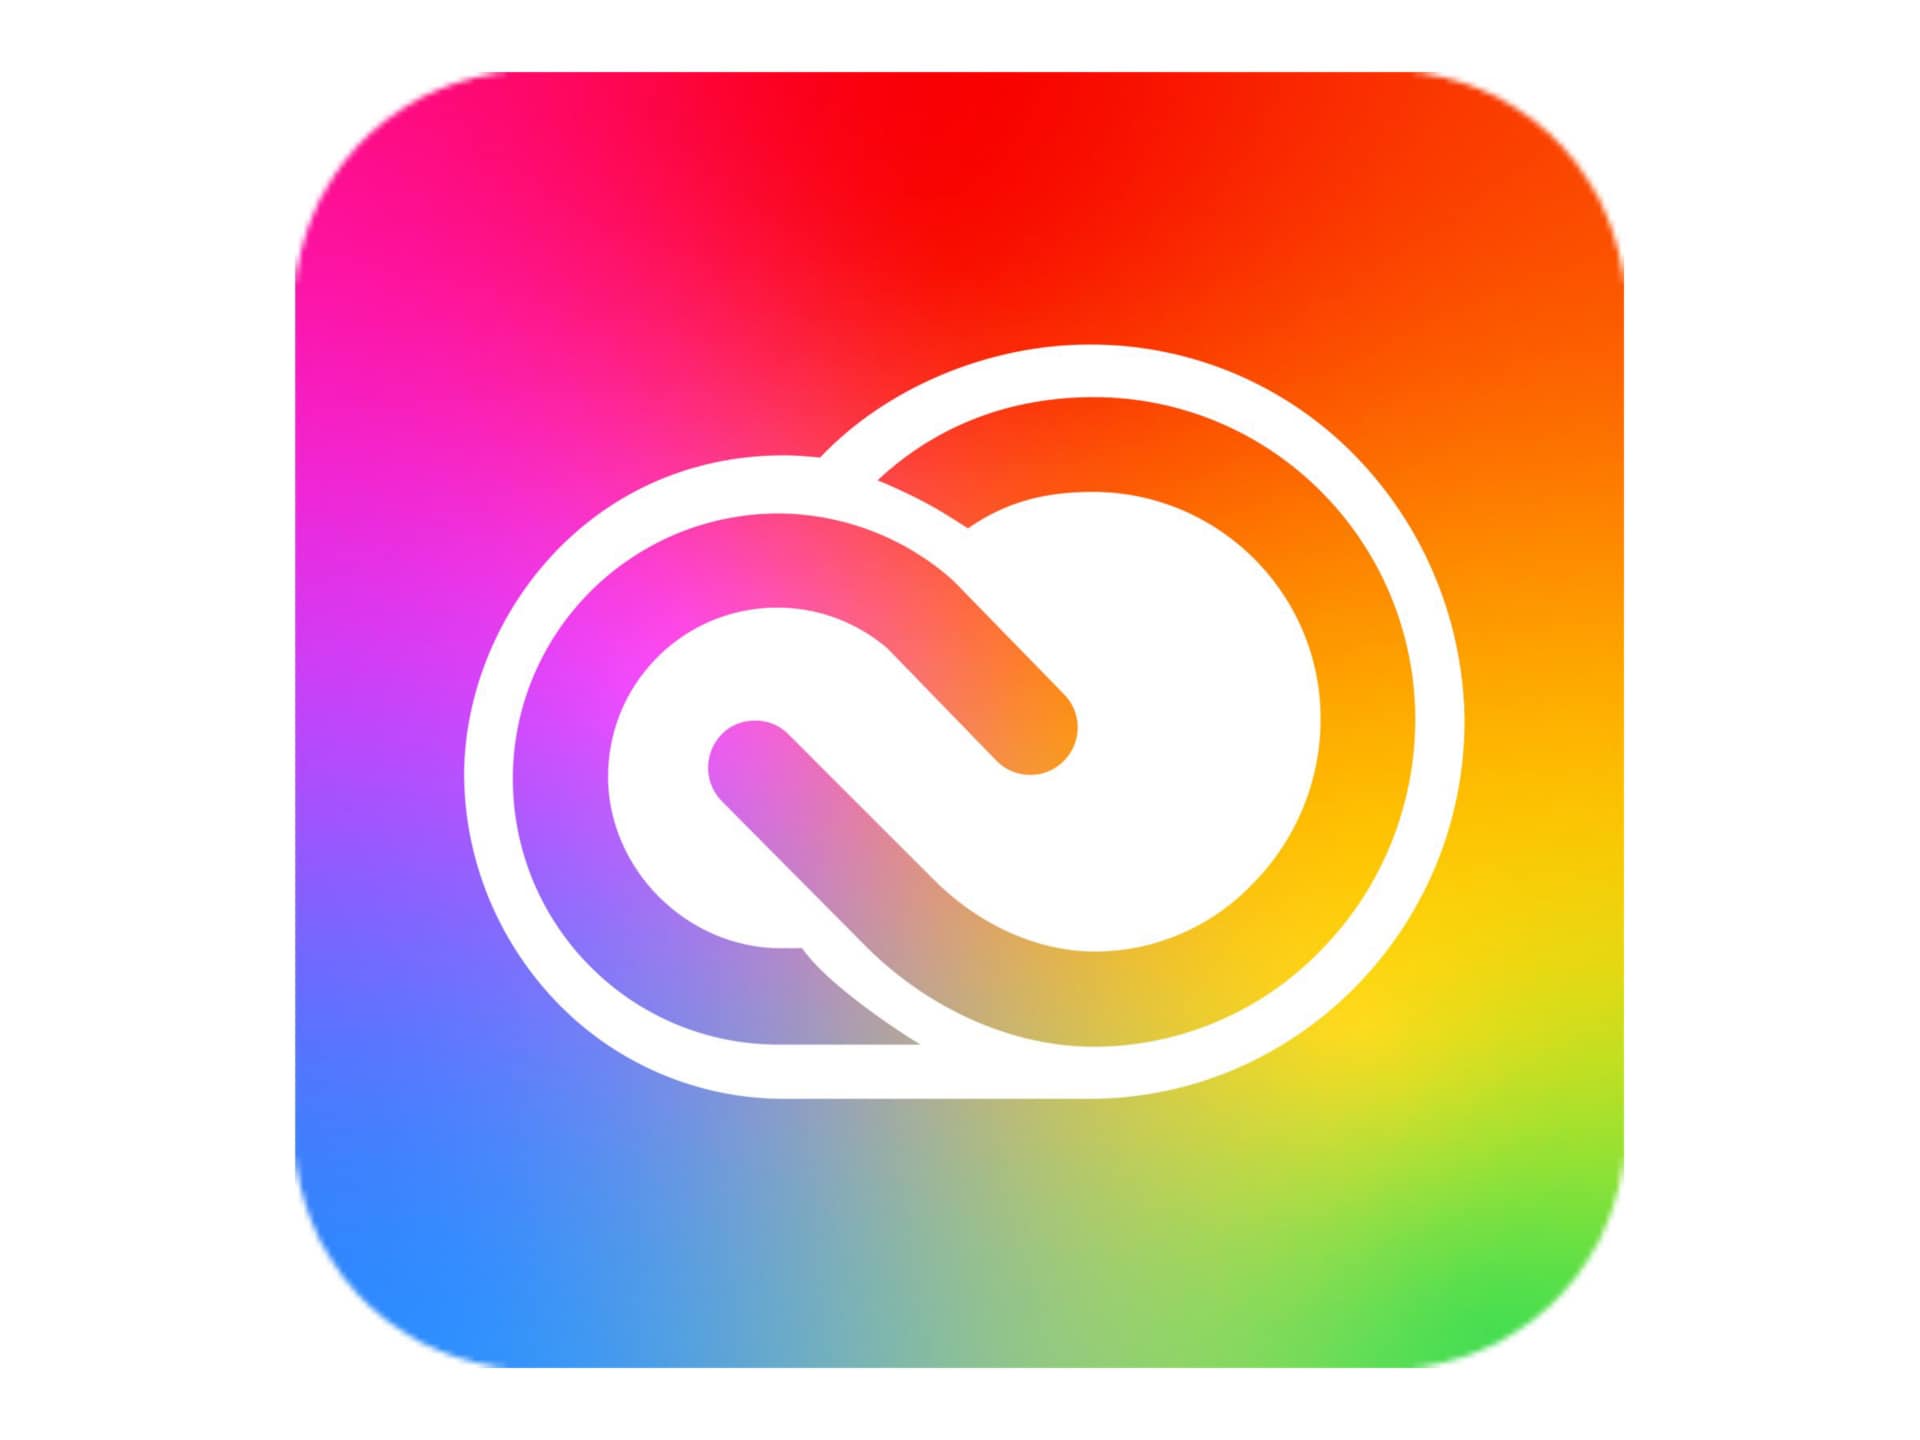 Adobe Creative Cloud for Enterprise - All Apps - Subscription New (1 month) - 1 device